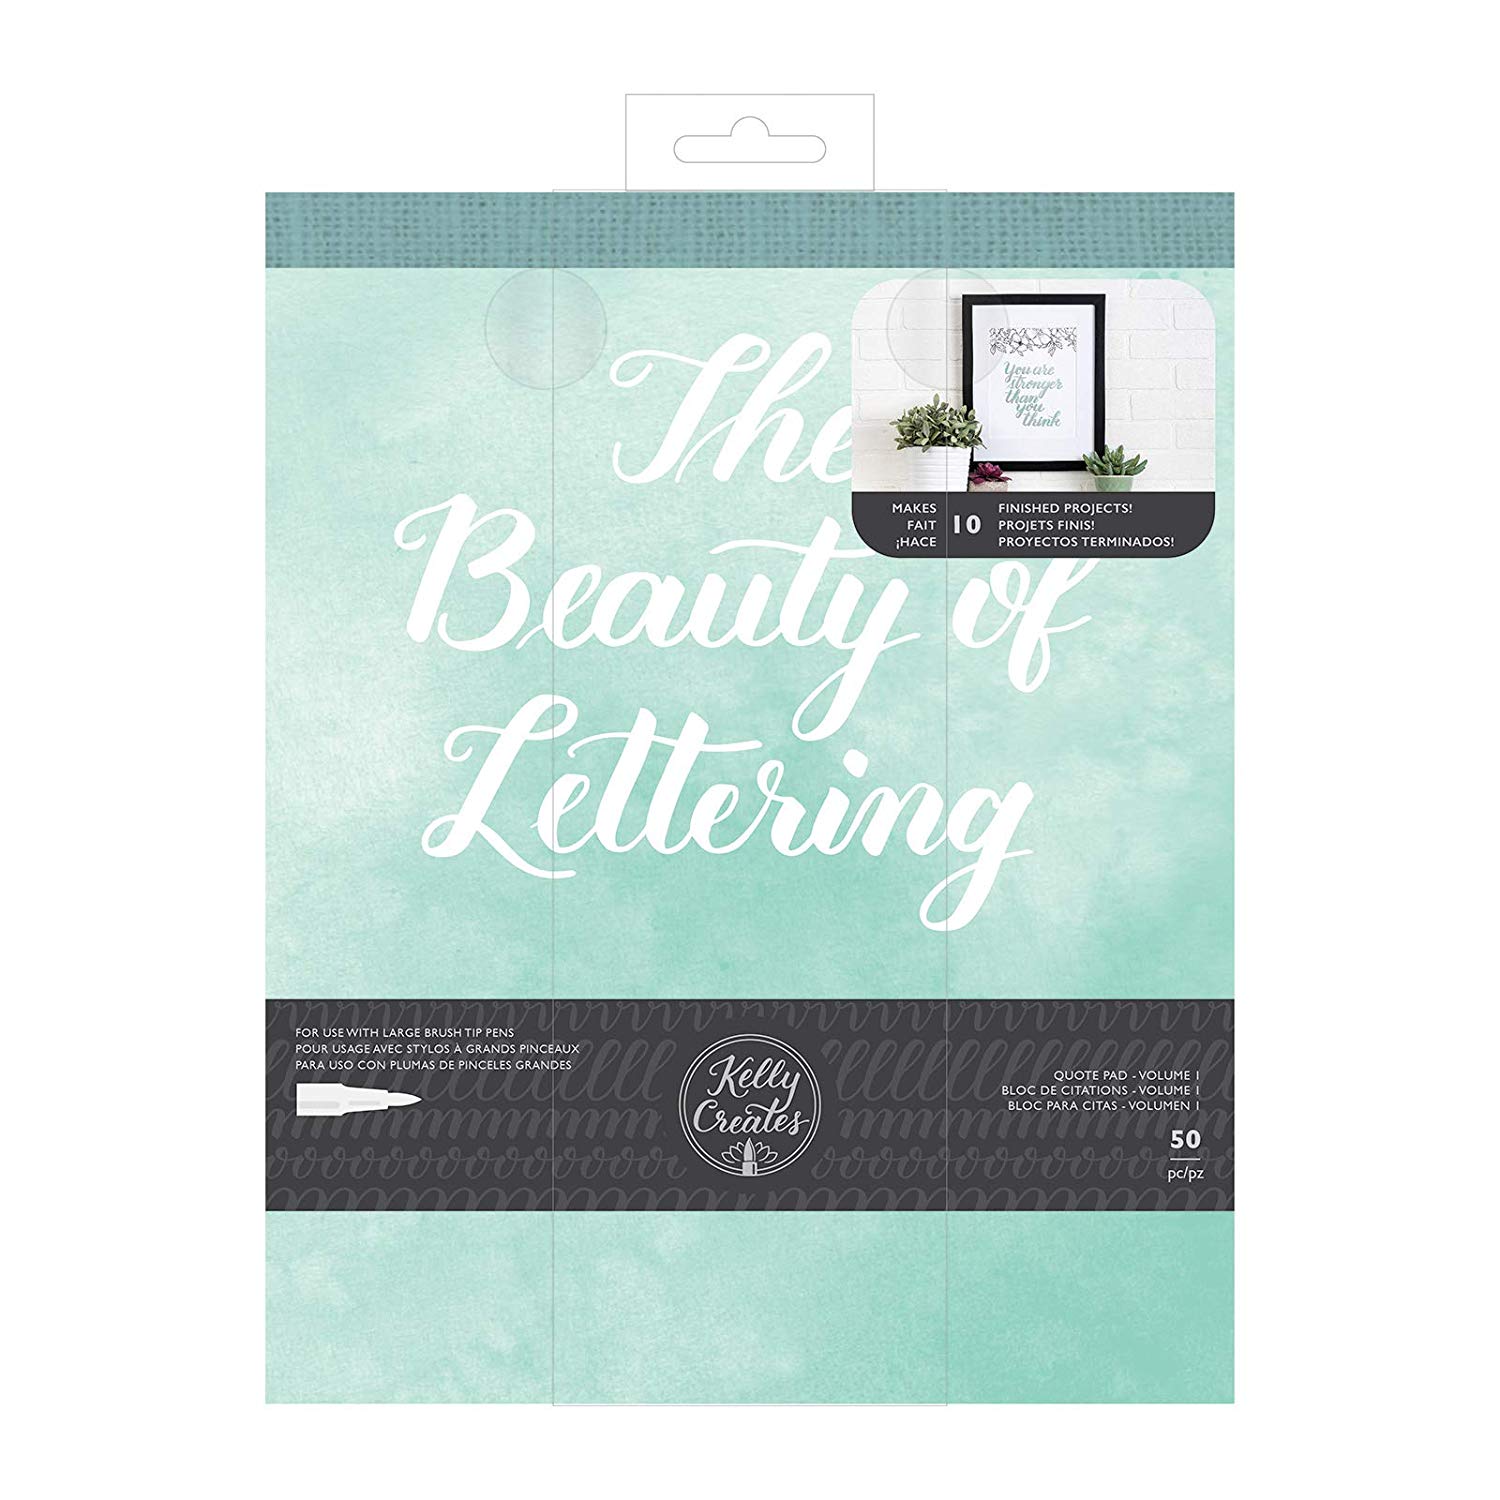 Kelly Creates • Beauty of lettering quote pad